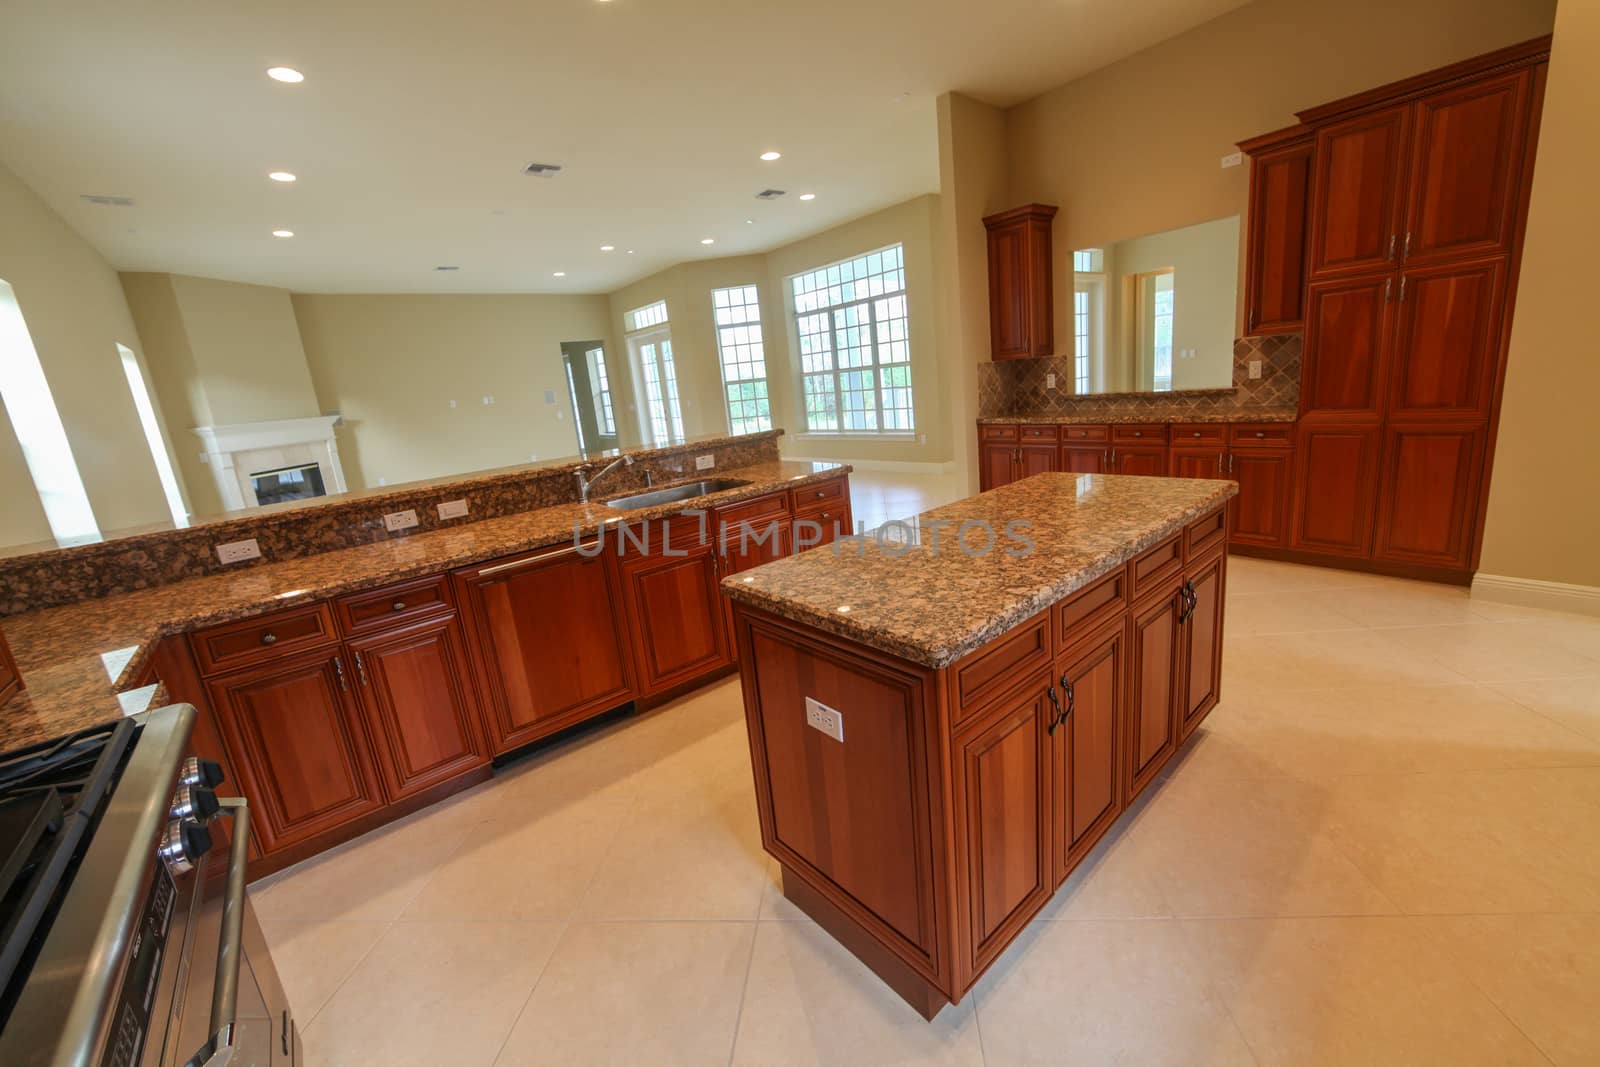 An interior shot of a kitchen in a home